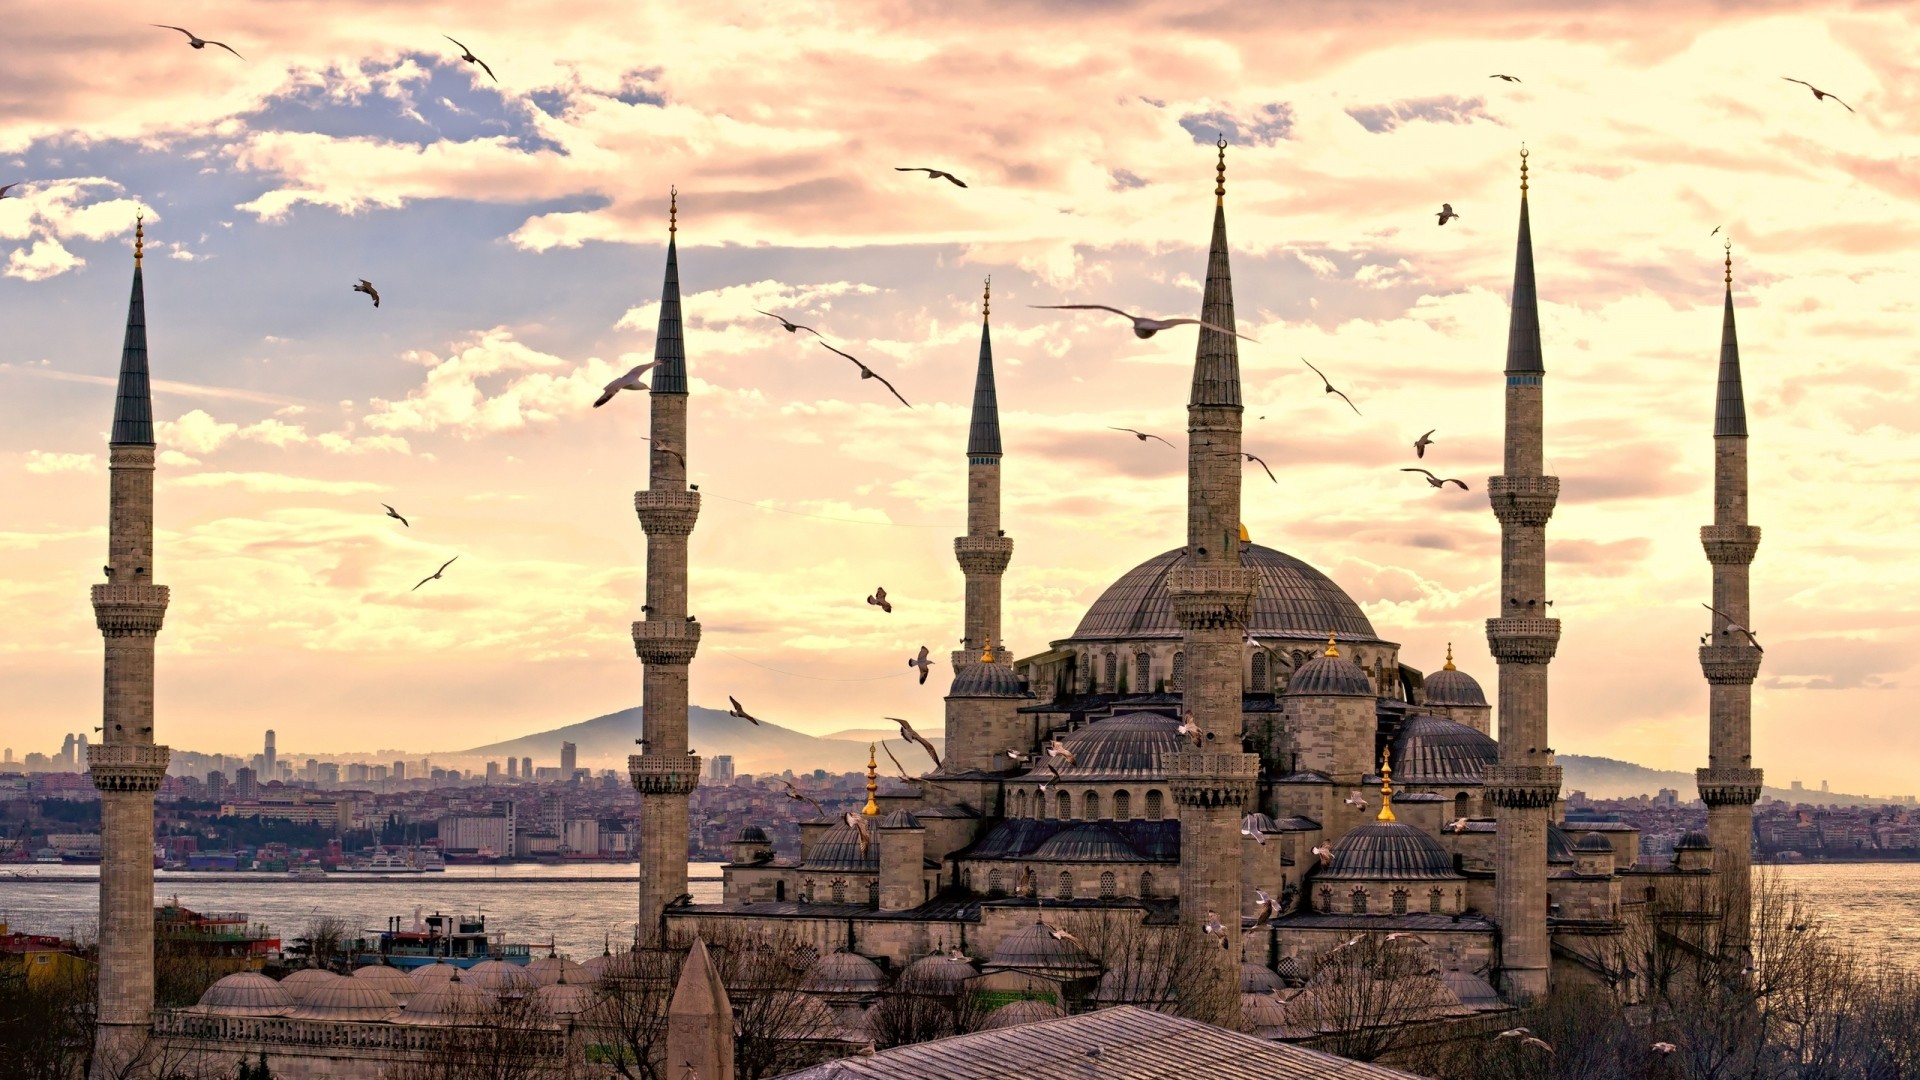 Preview Wallpaper Istanbul City Sultanahmet Mosque Turkey 1920x1080 1920x1080